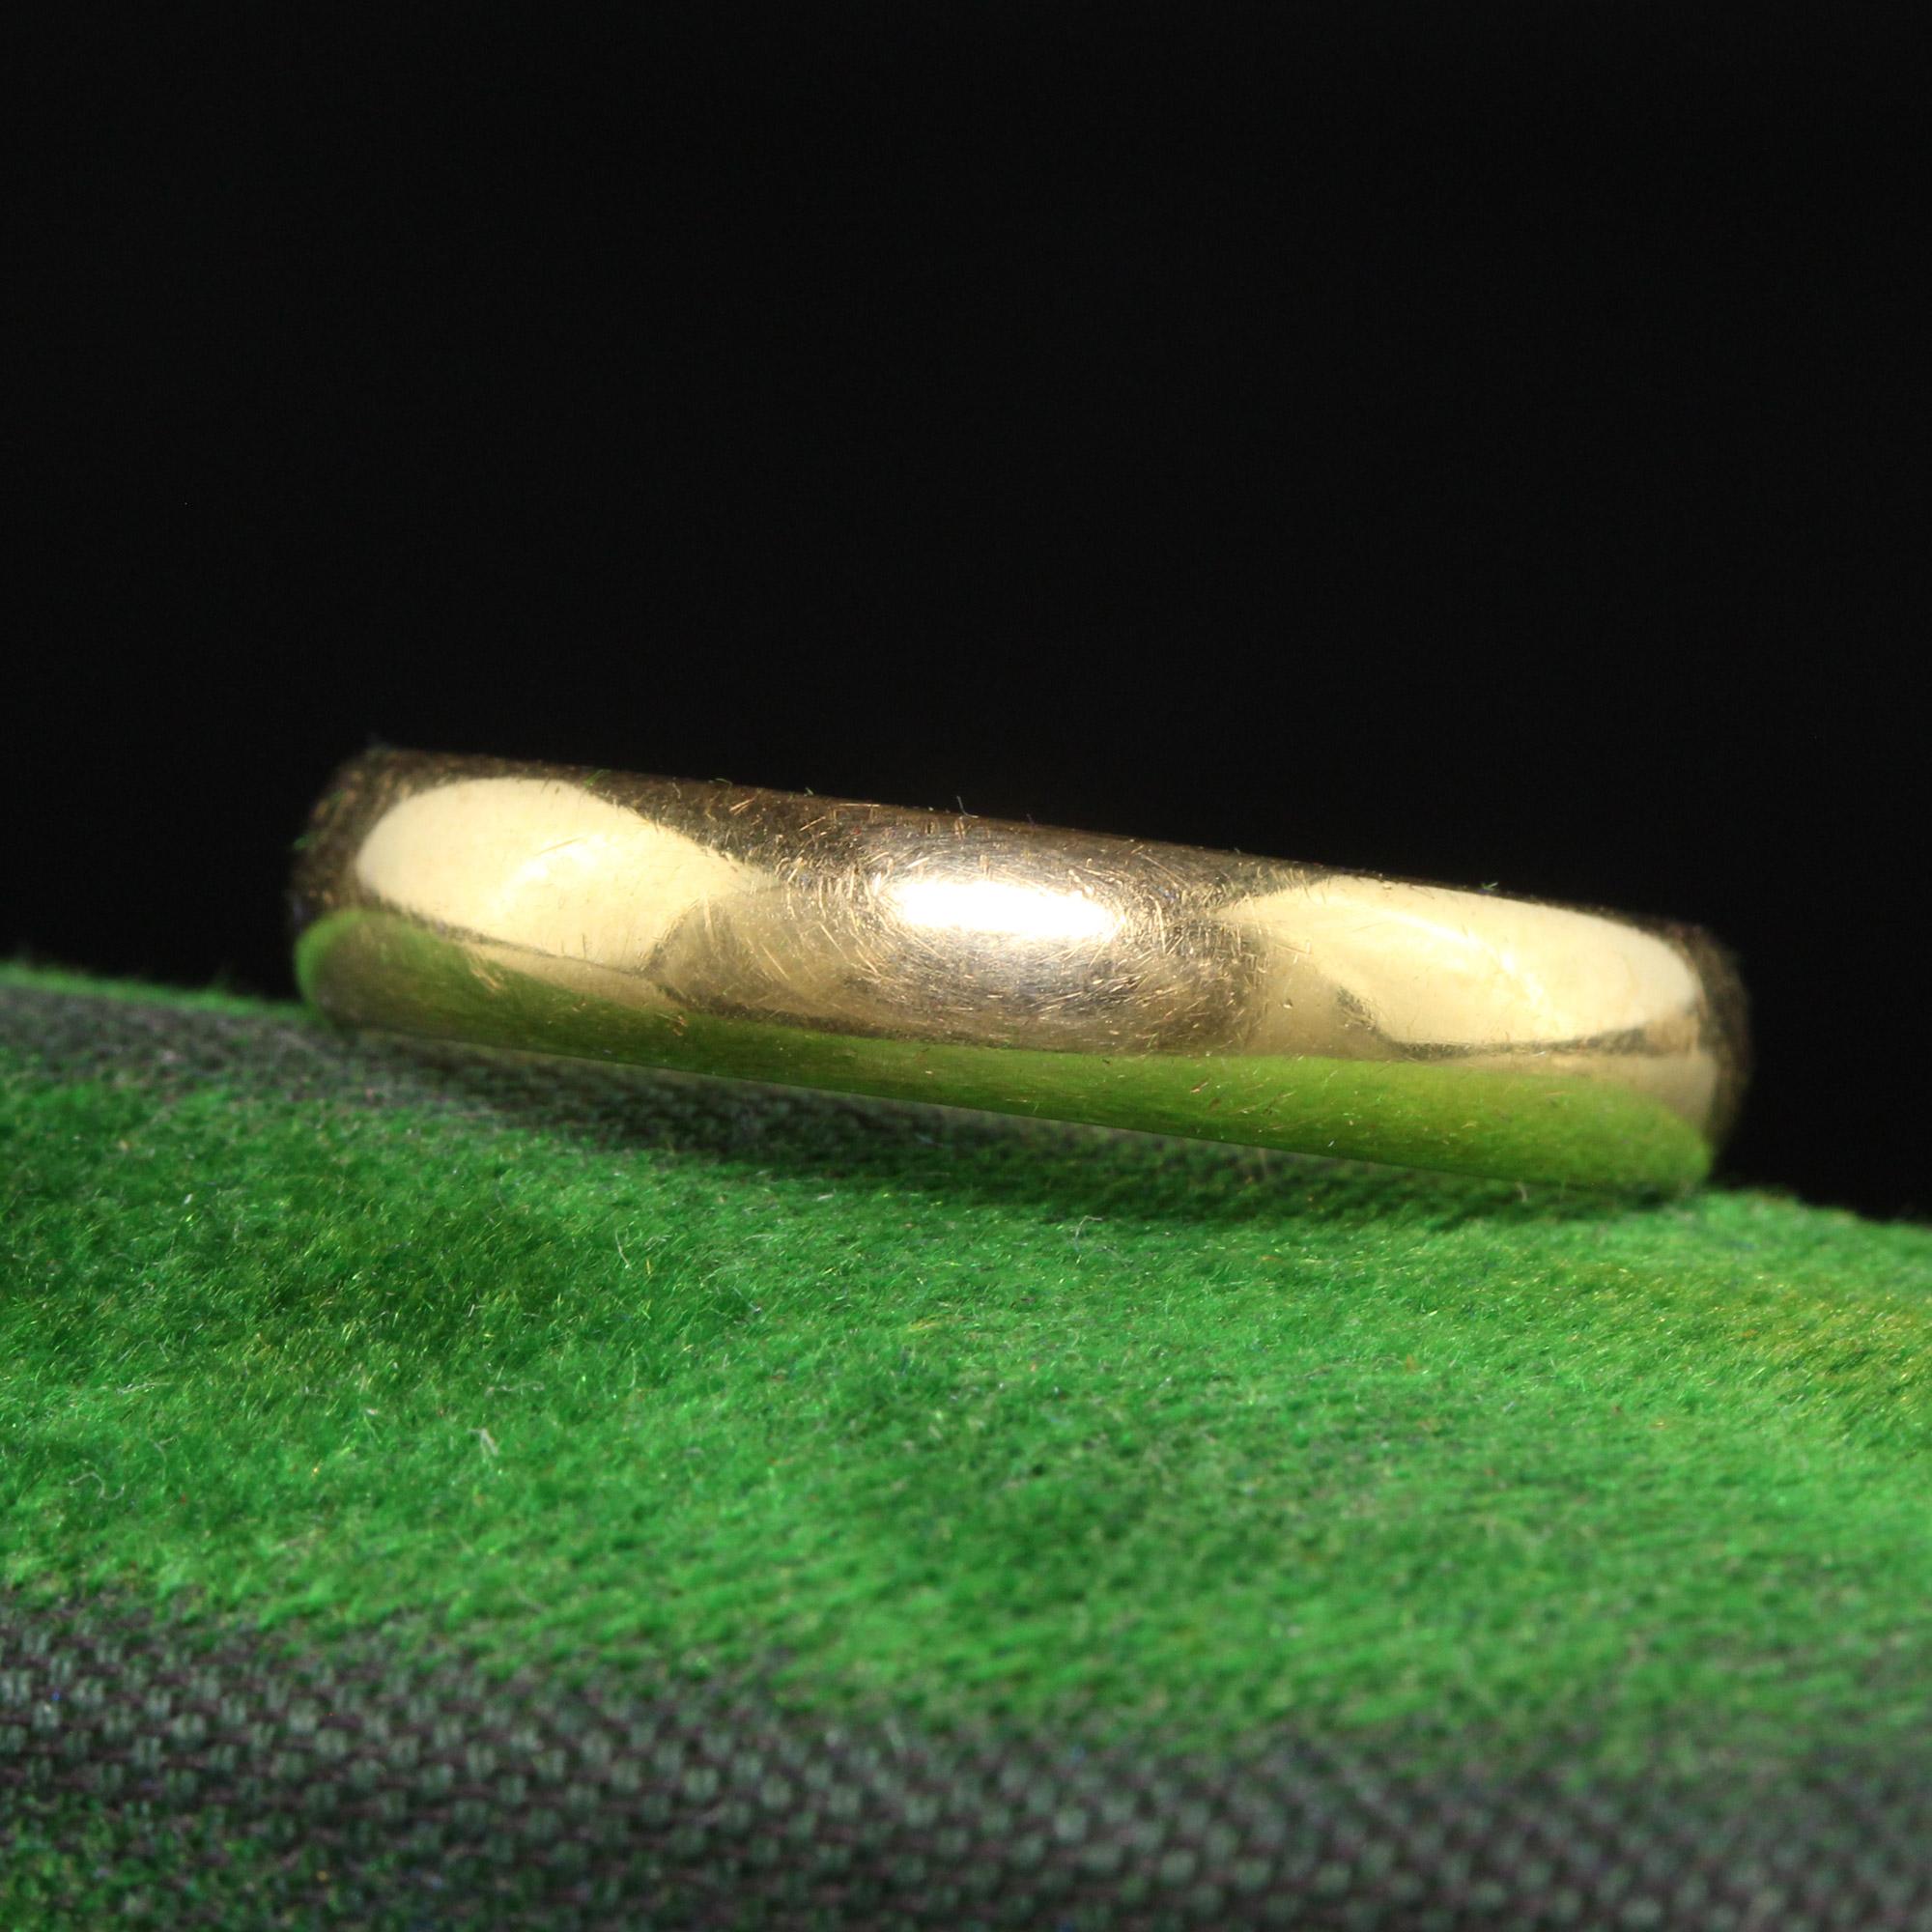 Beautiful Antique Art Deco 18K Yellow Gold Webster Classic Wedding Band - Size 9 3/4. This classic wedding band is crafted in 18k yellow gold. The band is in good condition and has a great width that is not too thin or thick. The inside of the band